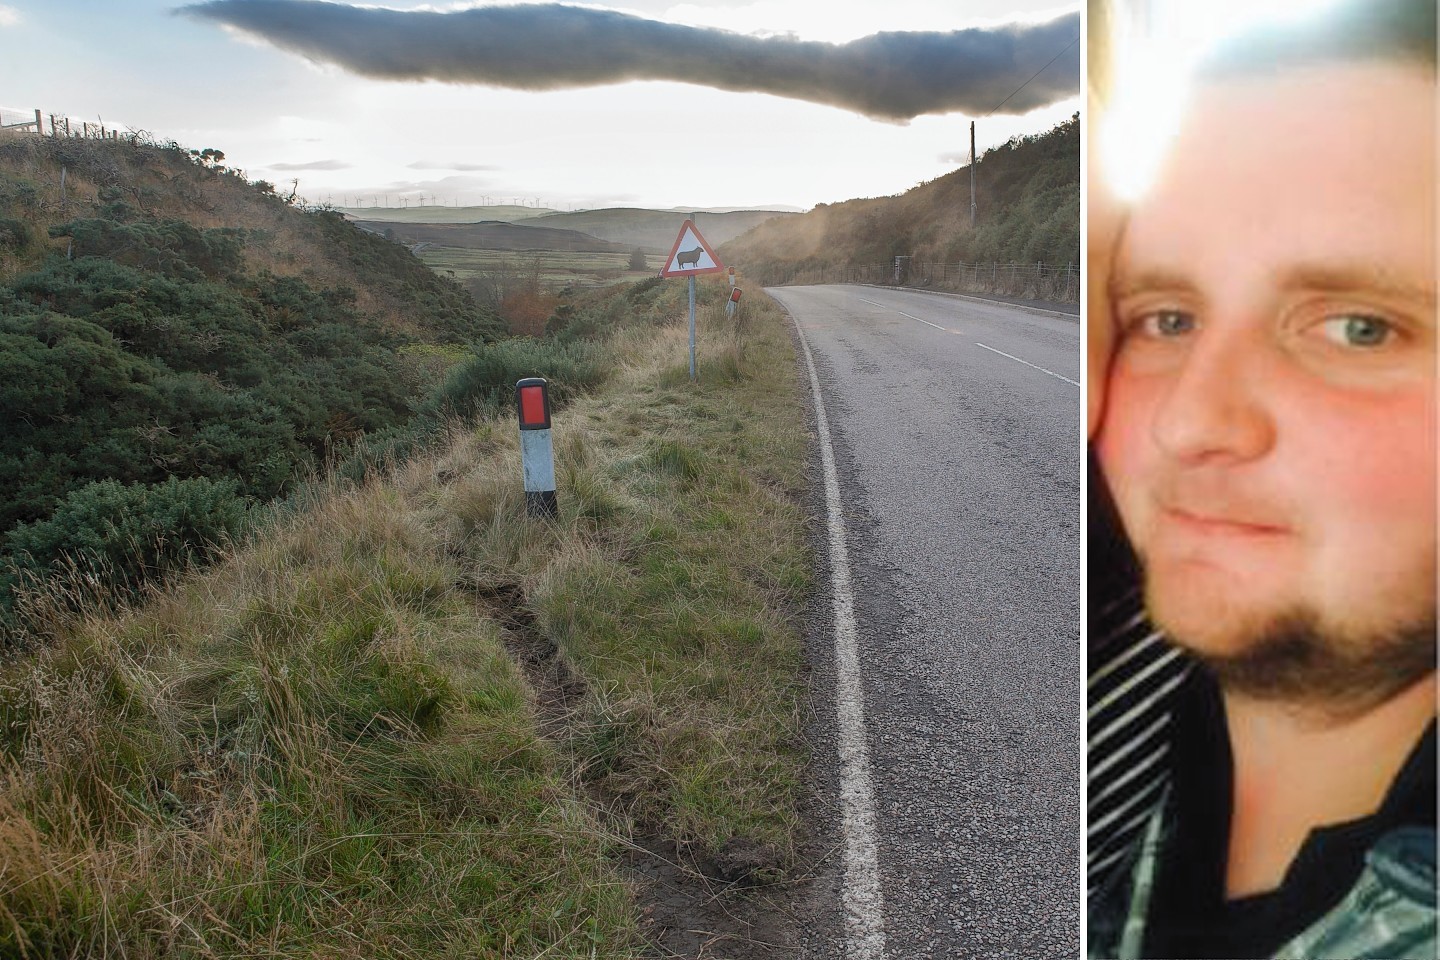 Niall Gunn died when his vehicle left the road on a sweeping bend and plunged down an embankment into a gully